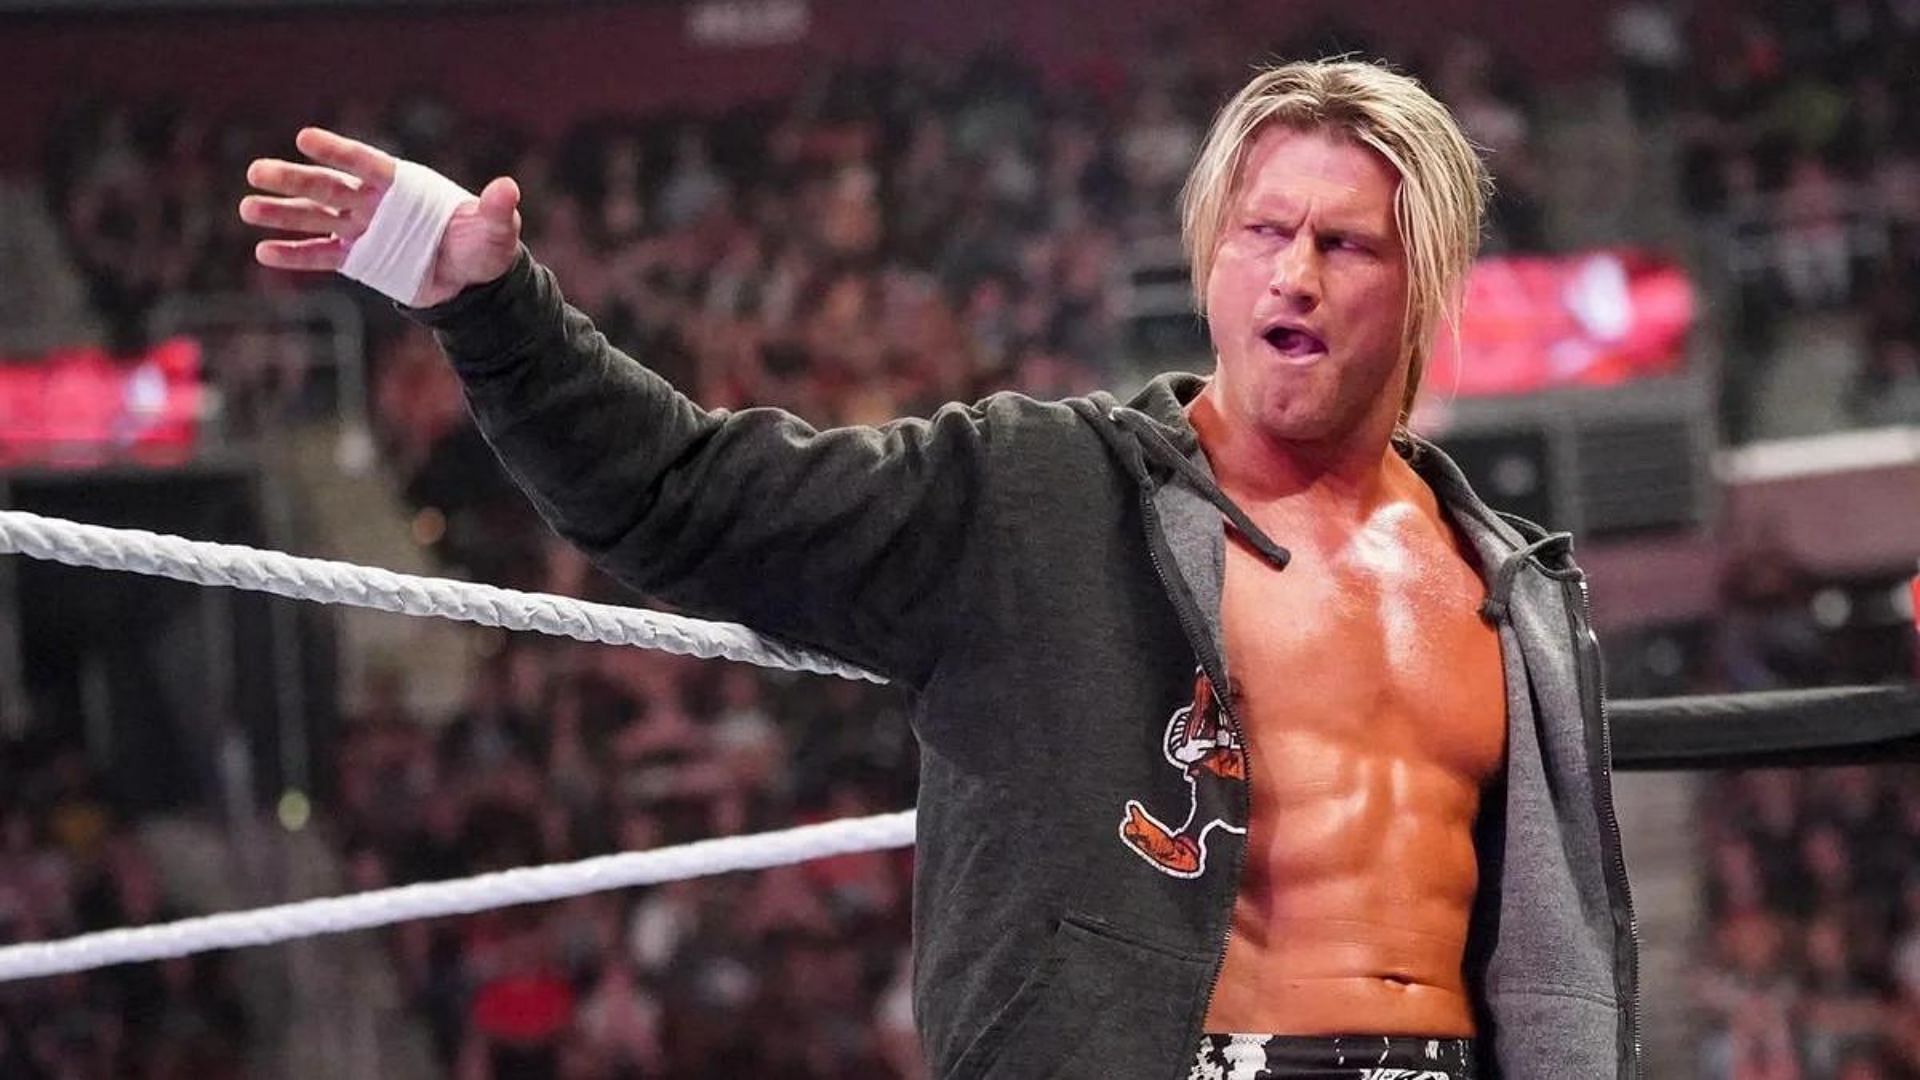 Dolph Ziggler has been linked to AEW following his release from WWE